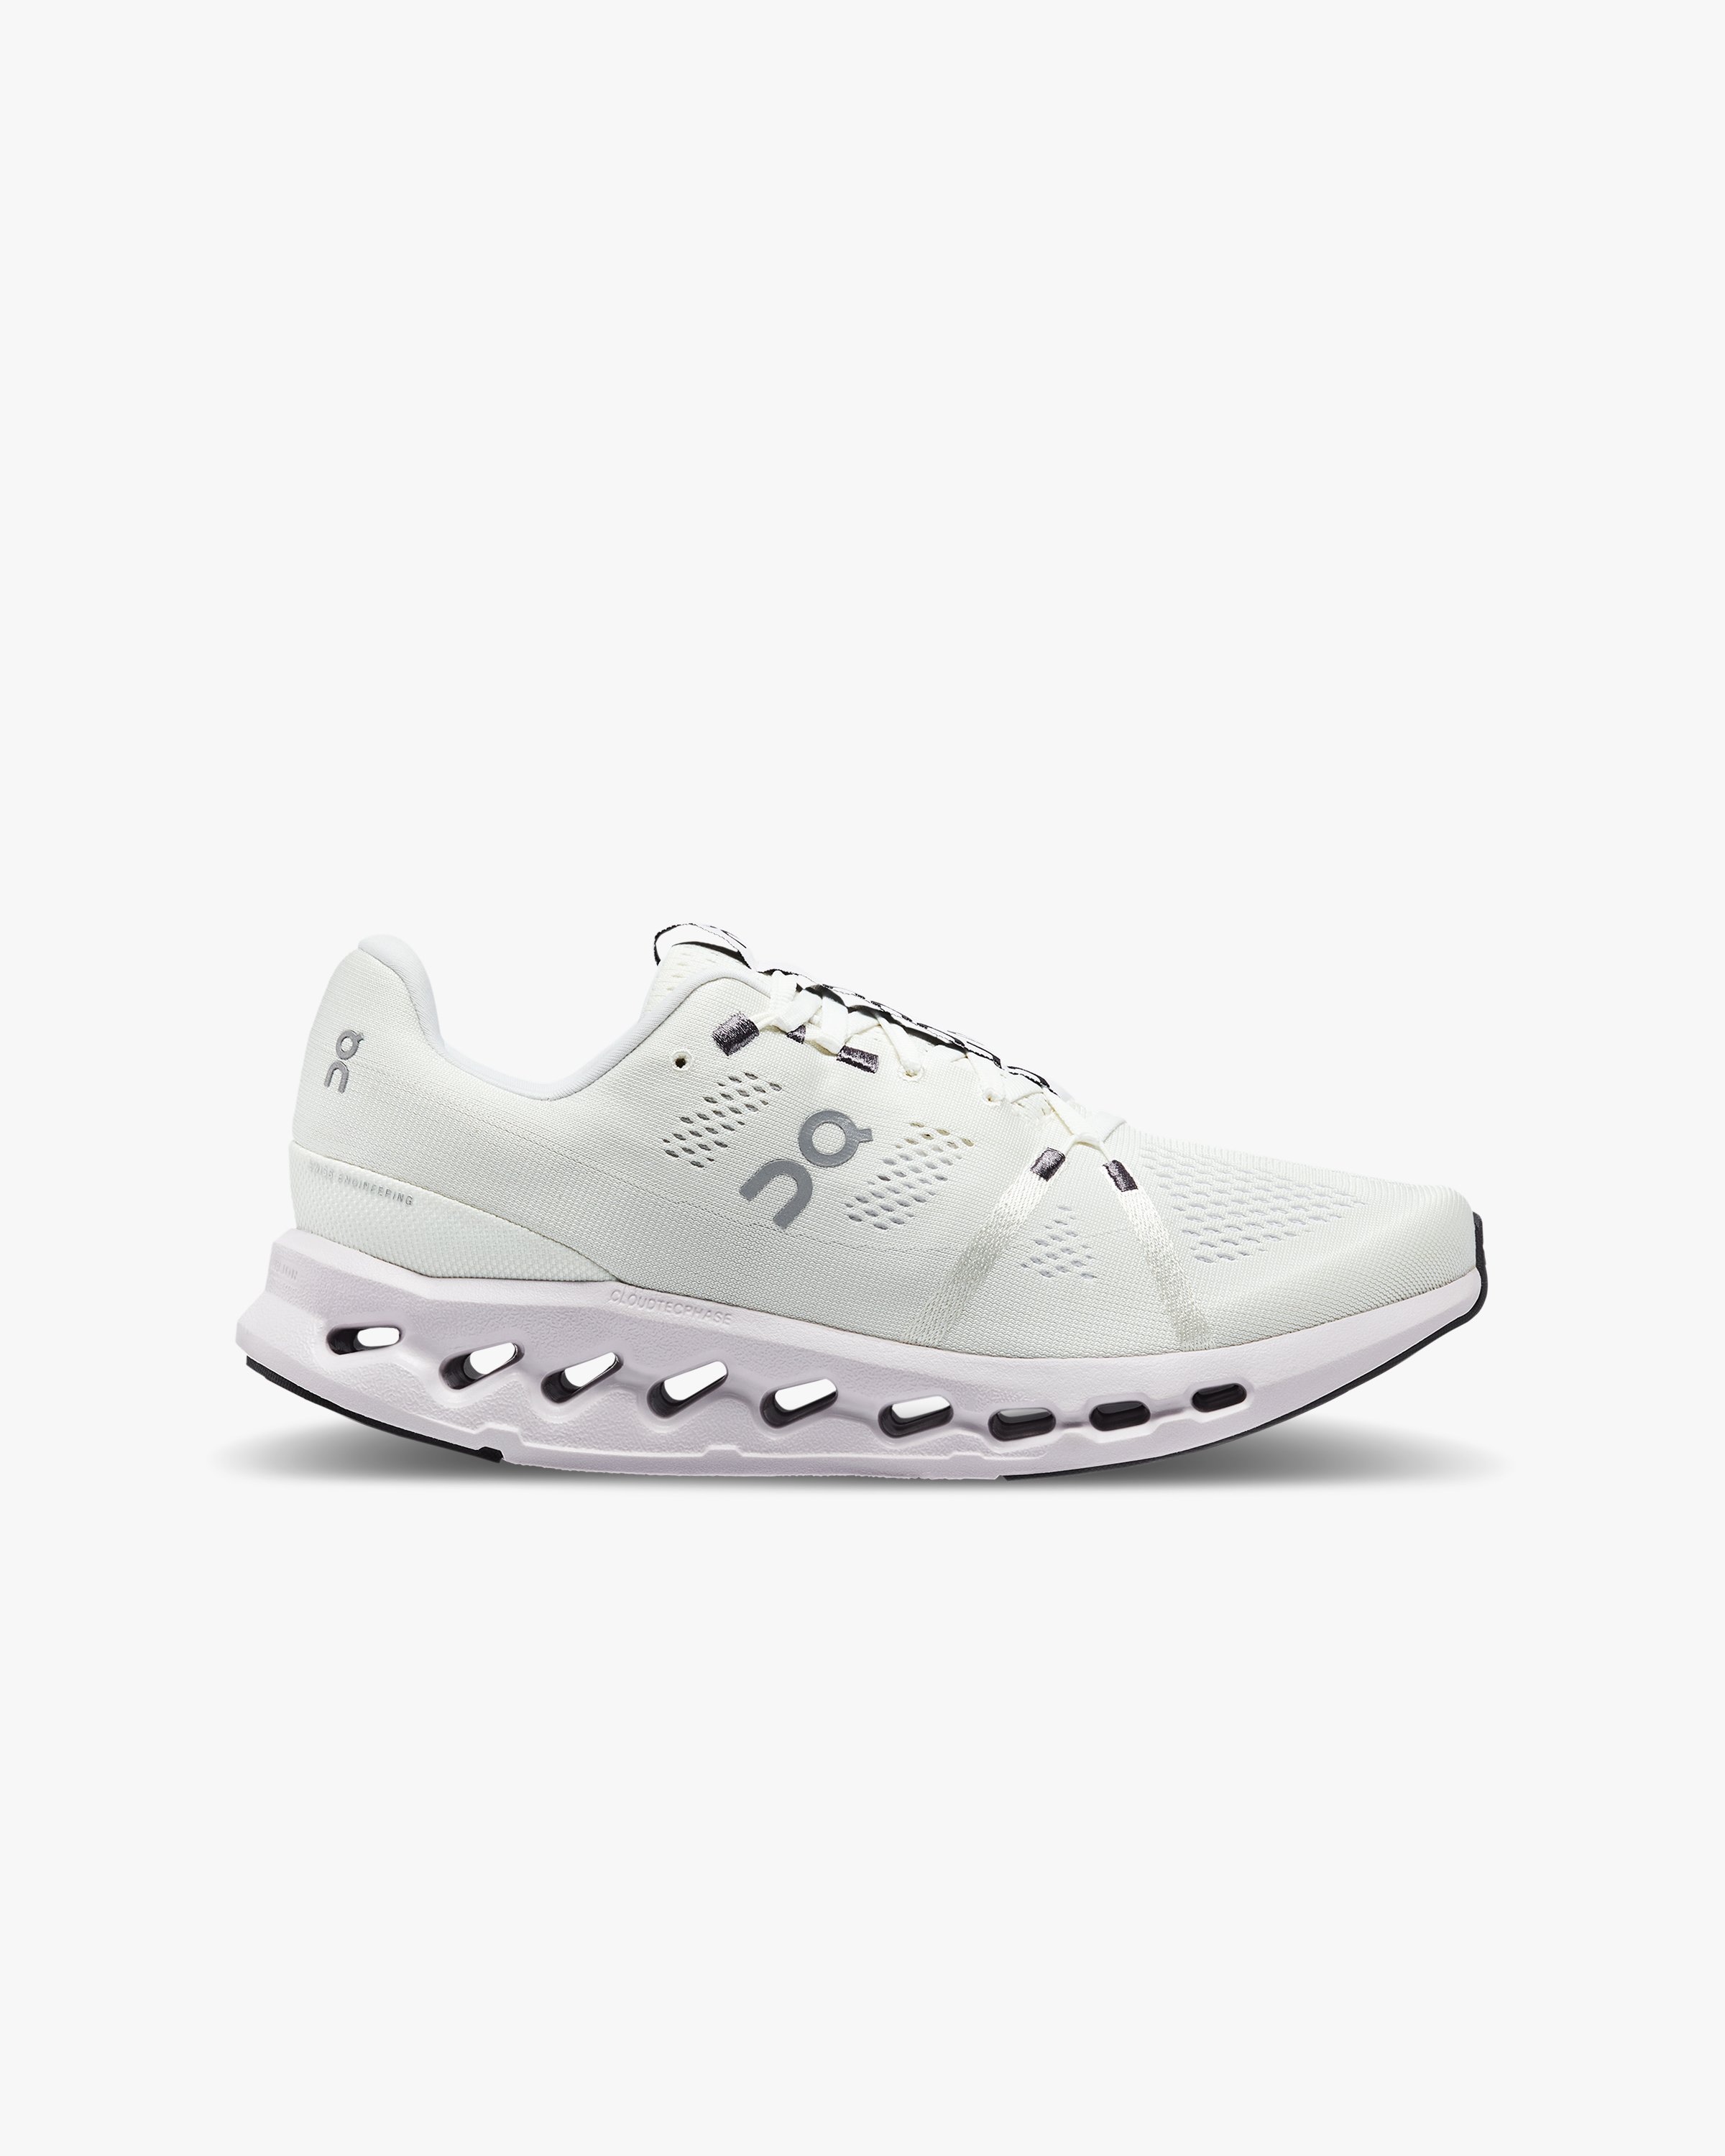 On - Cloudsurfer White/Frost - Footwear - White - Image 1